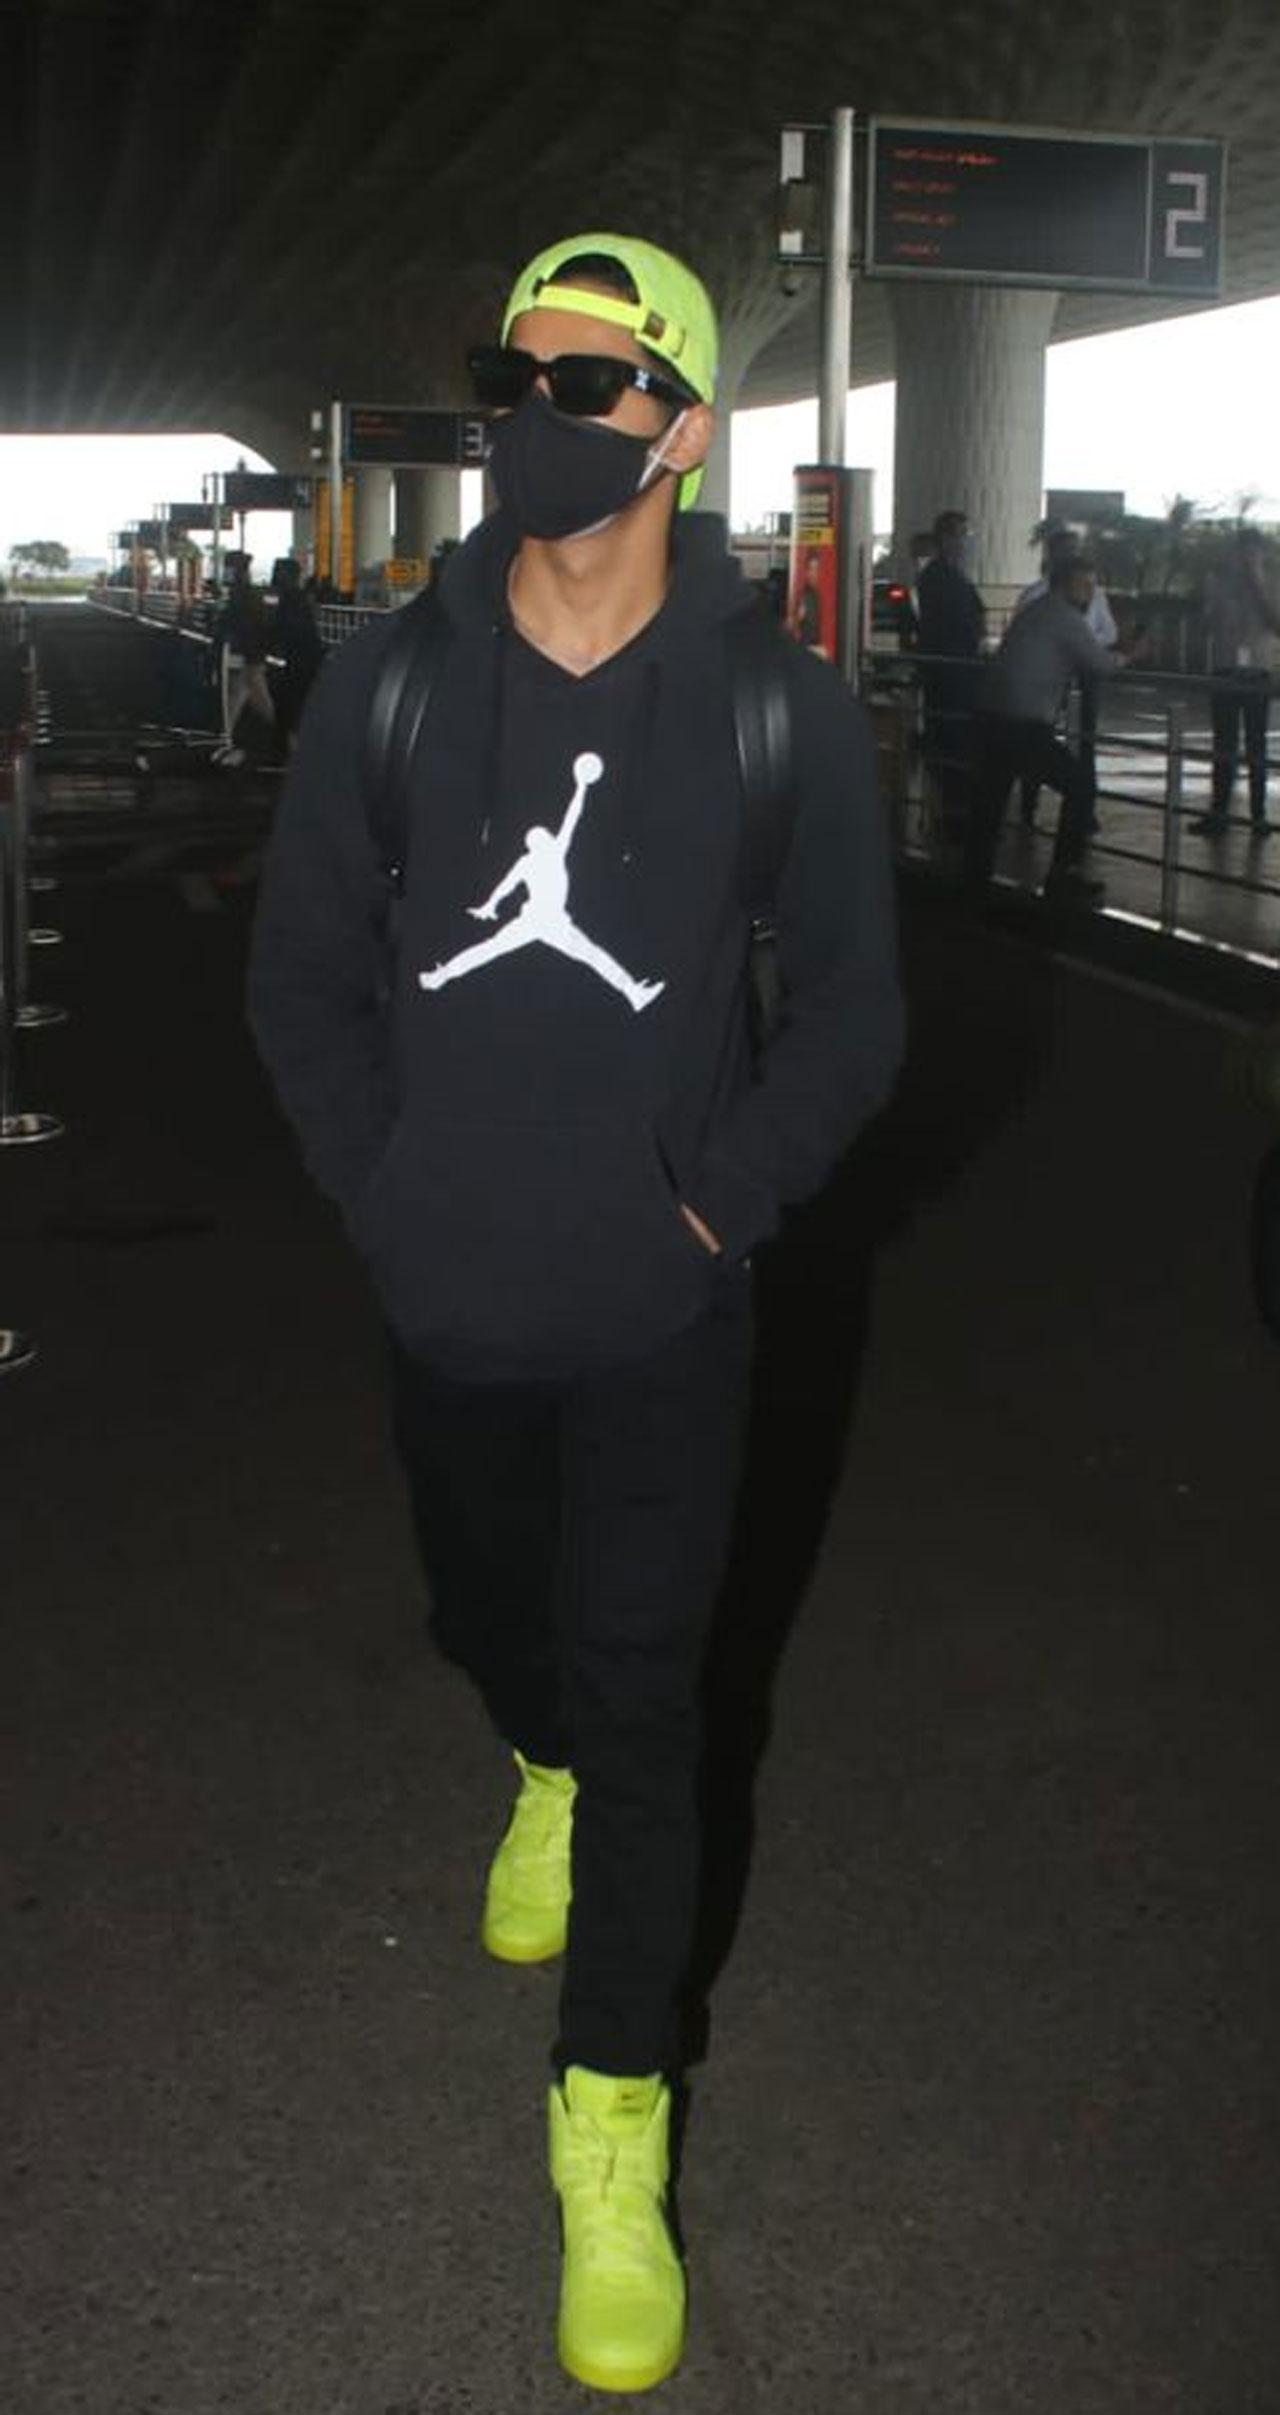 Ishaan Khatter twinned his cap with his pair of shoes and chose a black outfit for his latest airport look. While his next film Pippa was originally scheduled to roll in March, director Raja Krishna Menon had to hold it off as the second wave of the pandemic hit India.